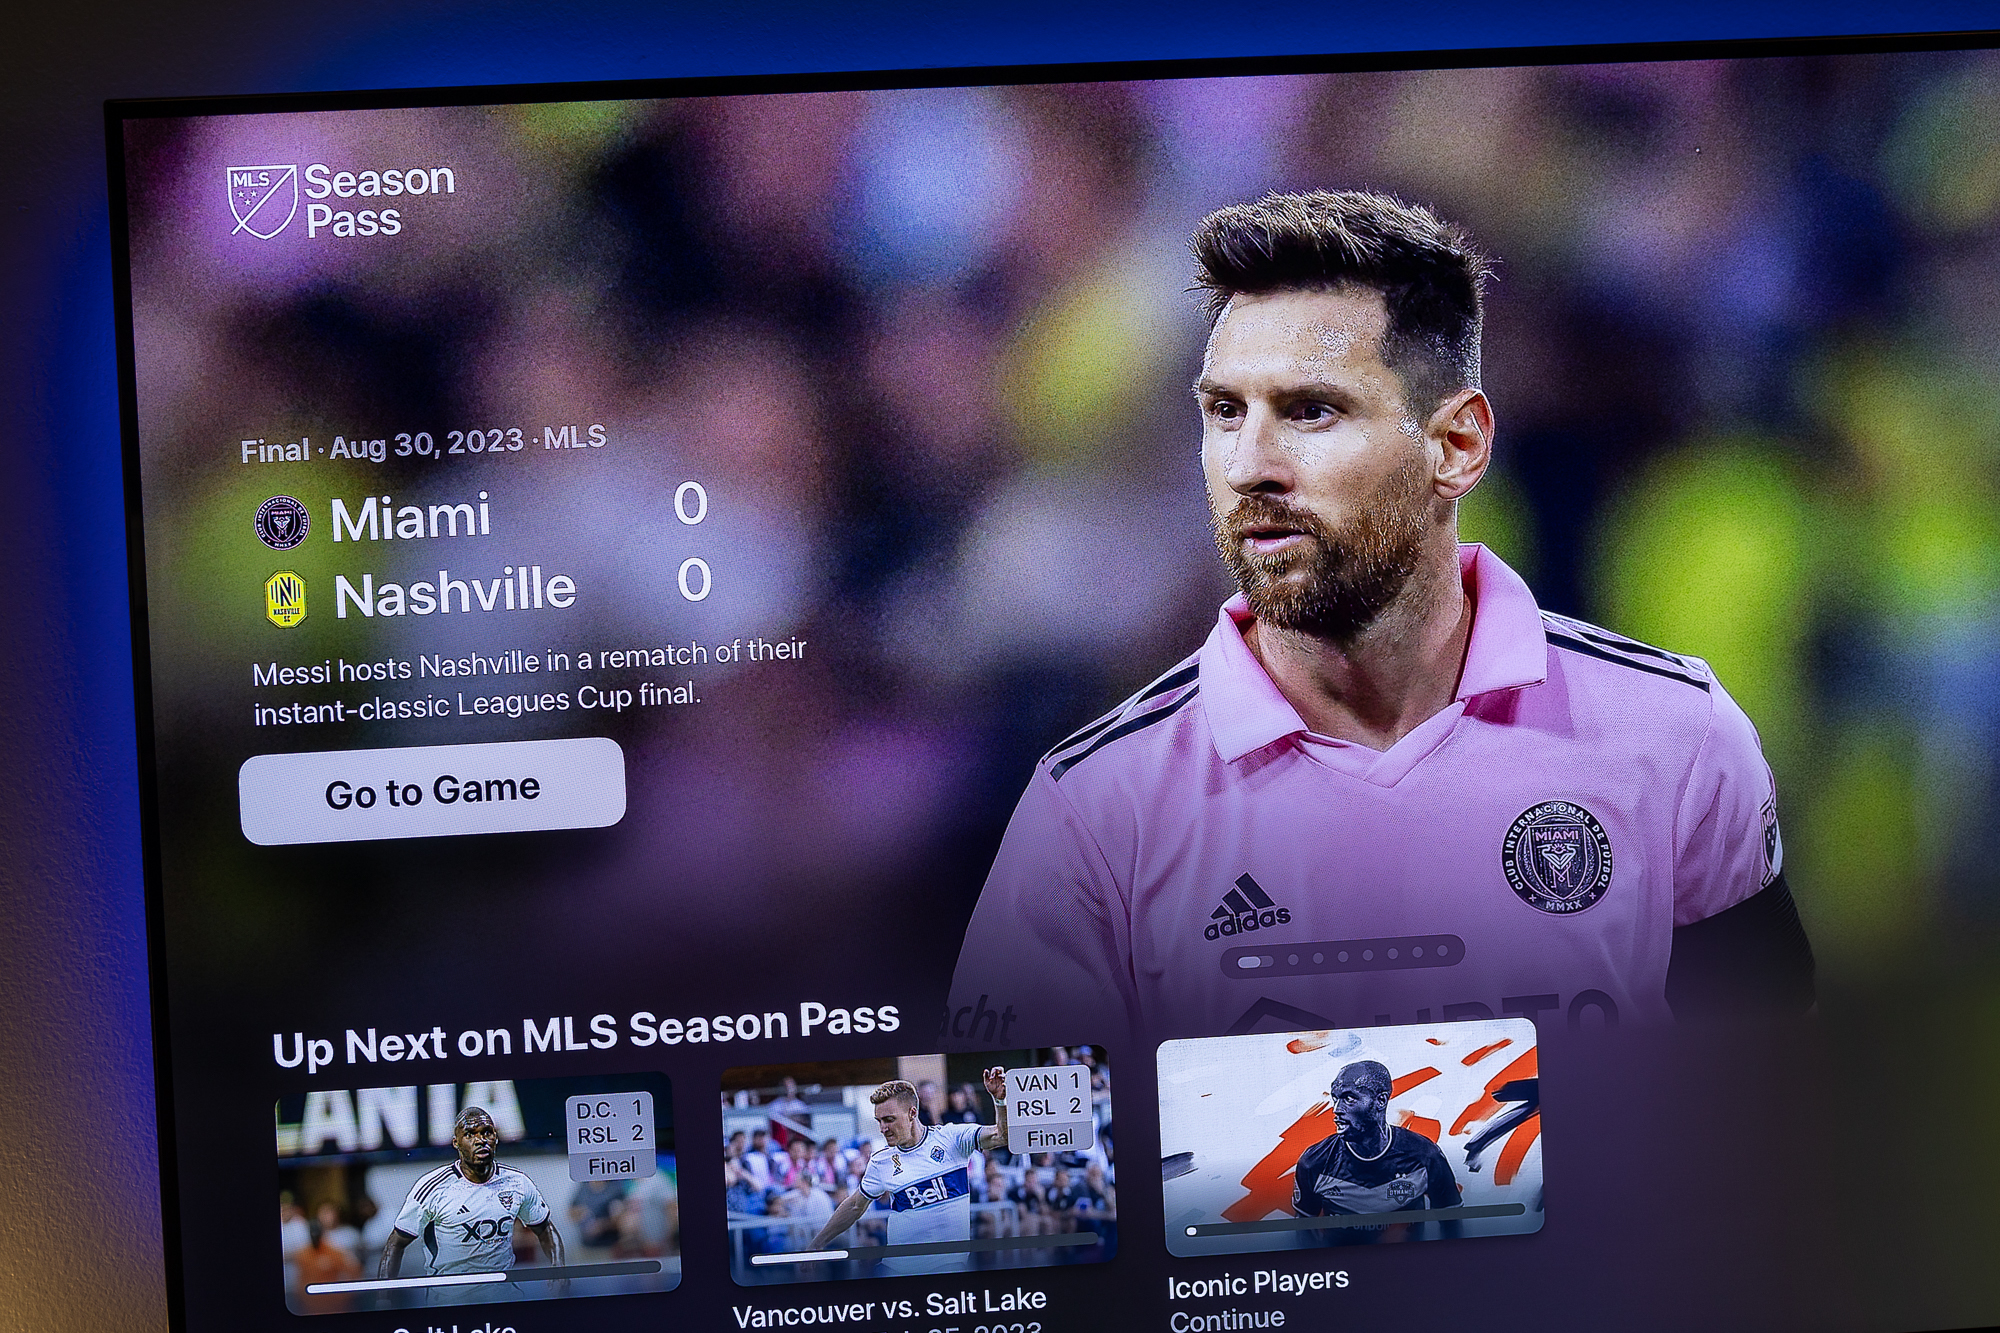 Apple and Major League Soccer to present all MLS matches around the world  for 10 years, beginning in 2023